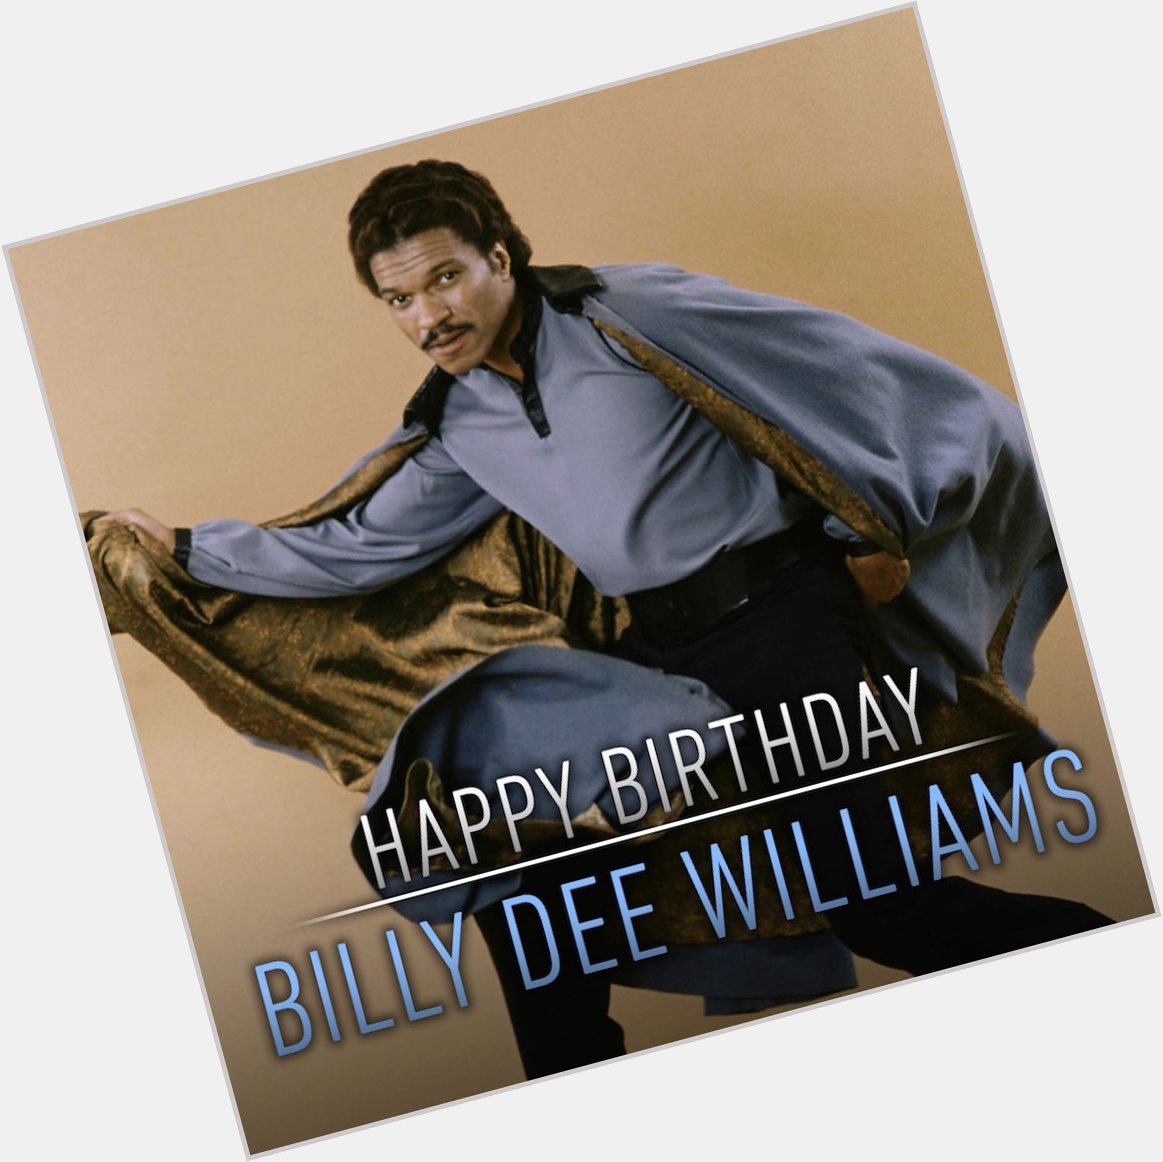 Happy birthday to the smoothest scoundrel in the galaxy, Billy Dee Williams 